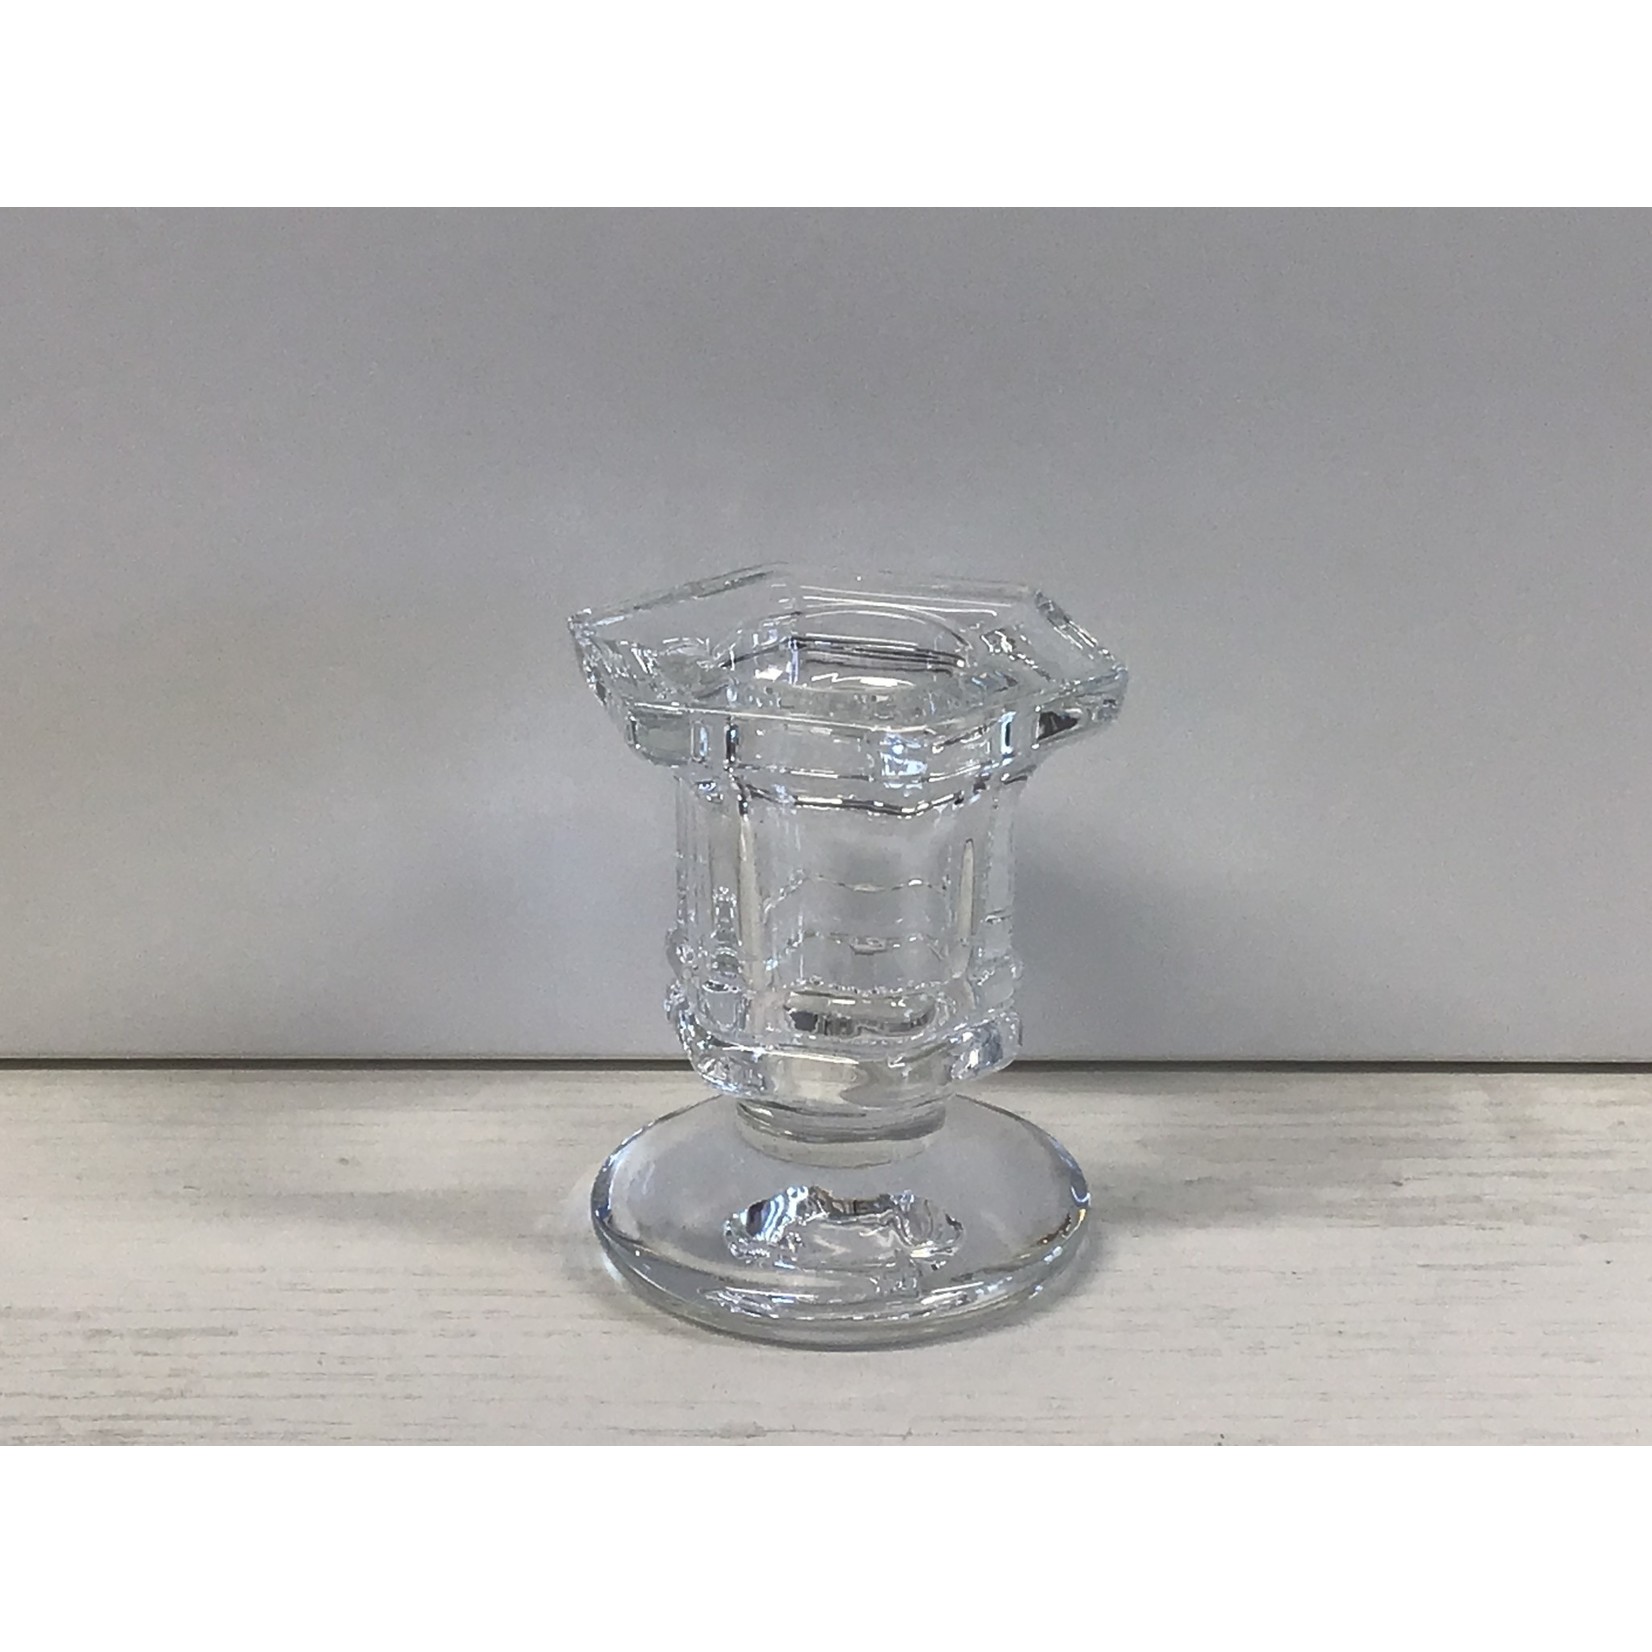 Glass Candle Holder for Taper